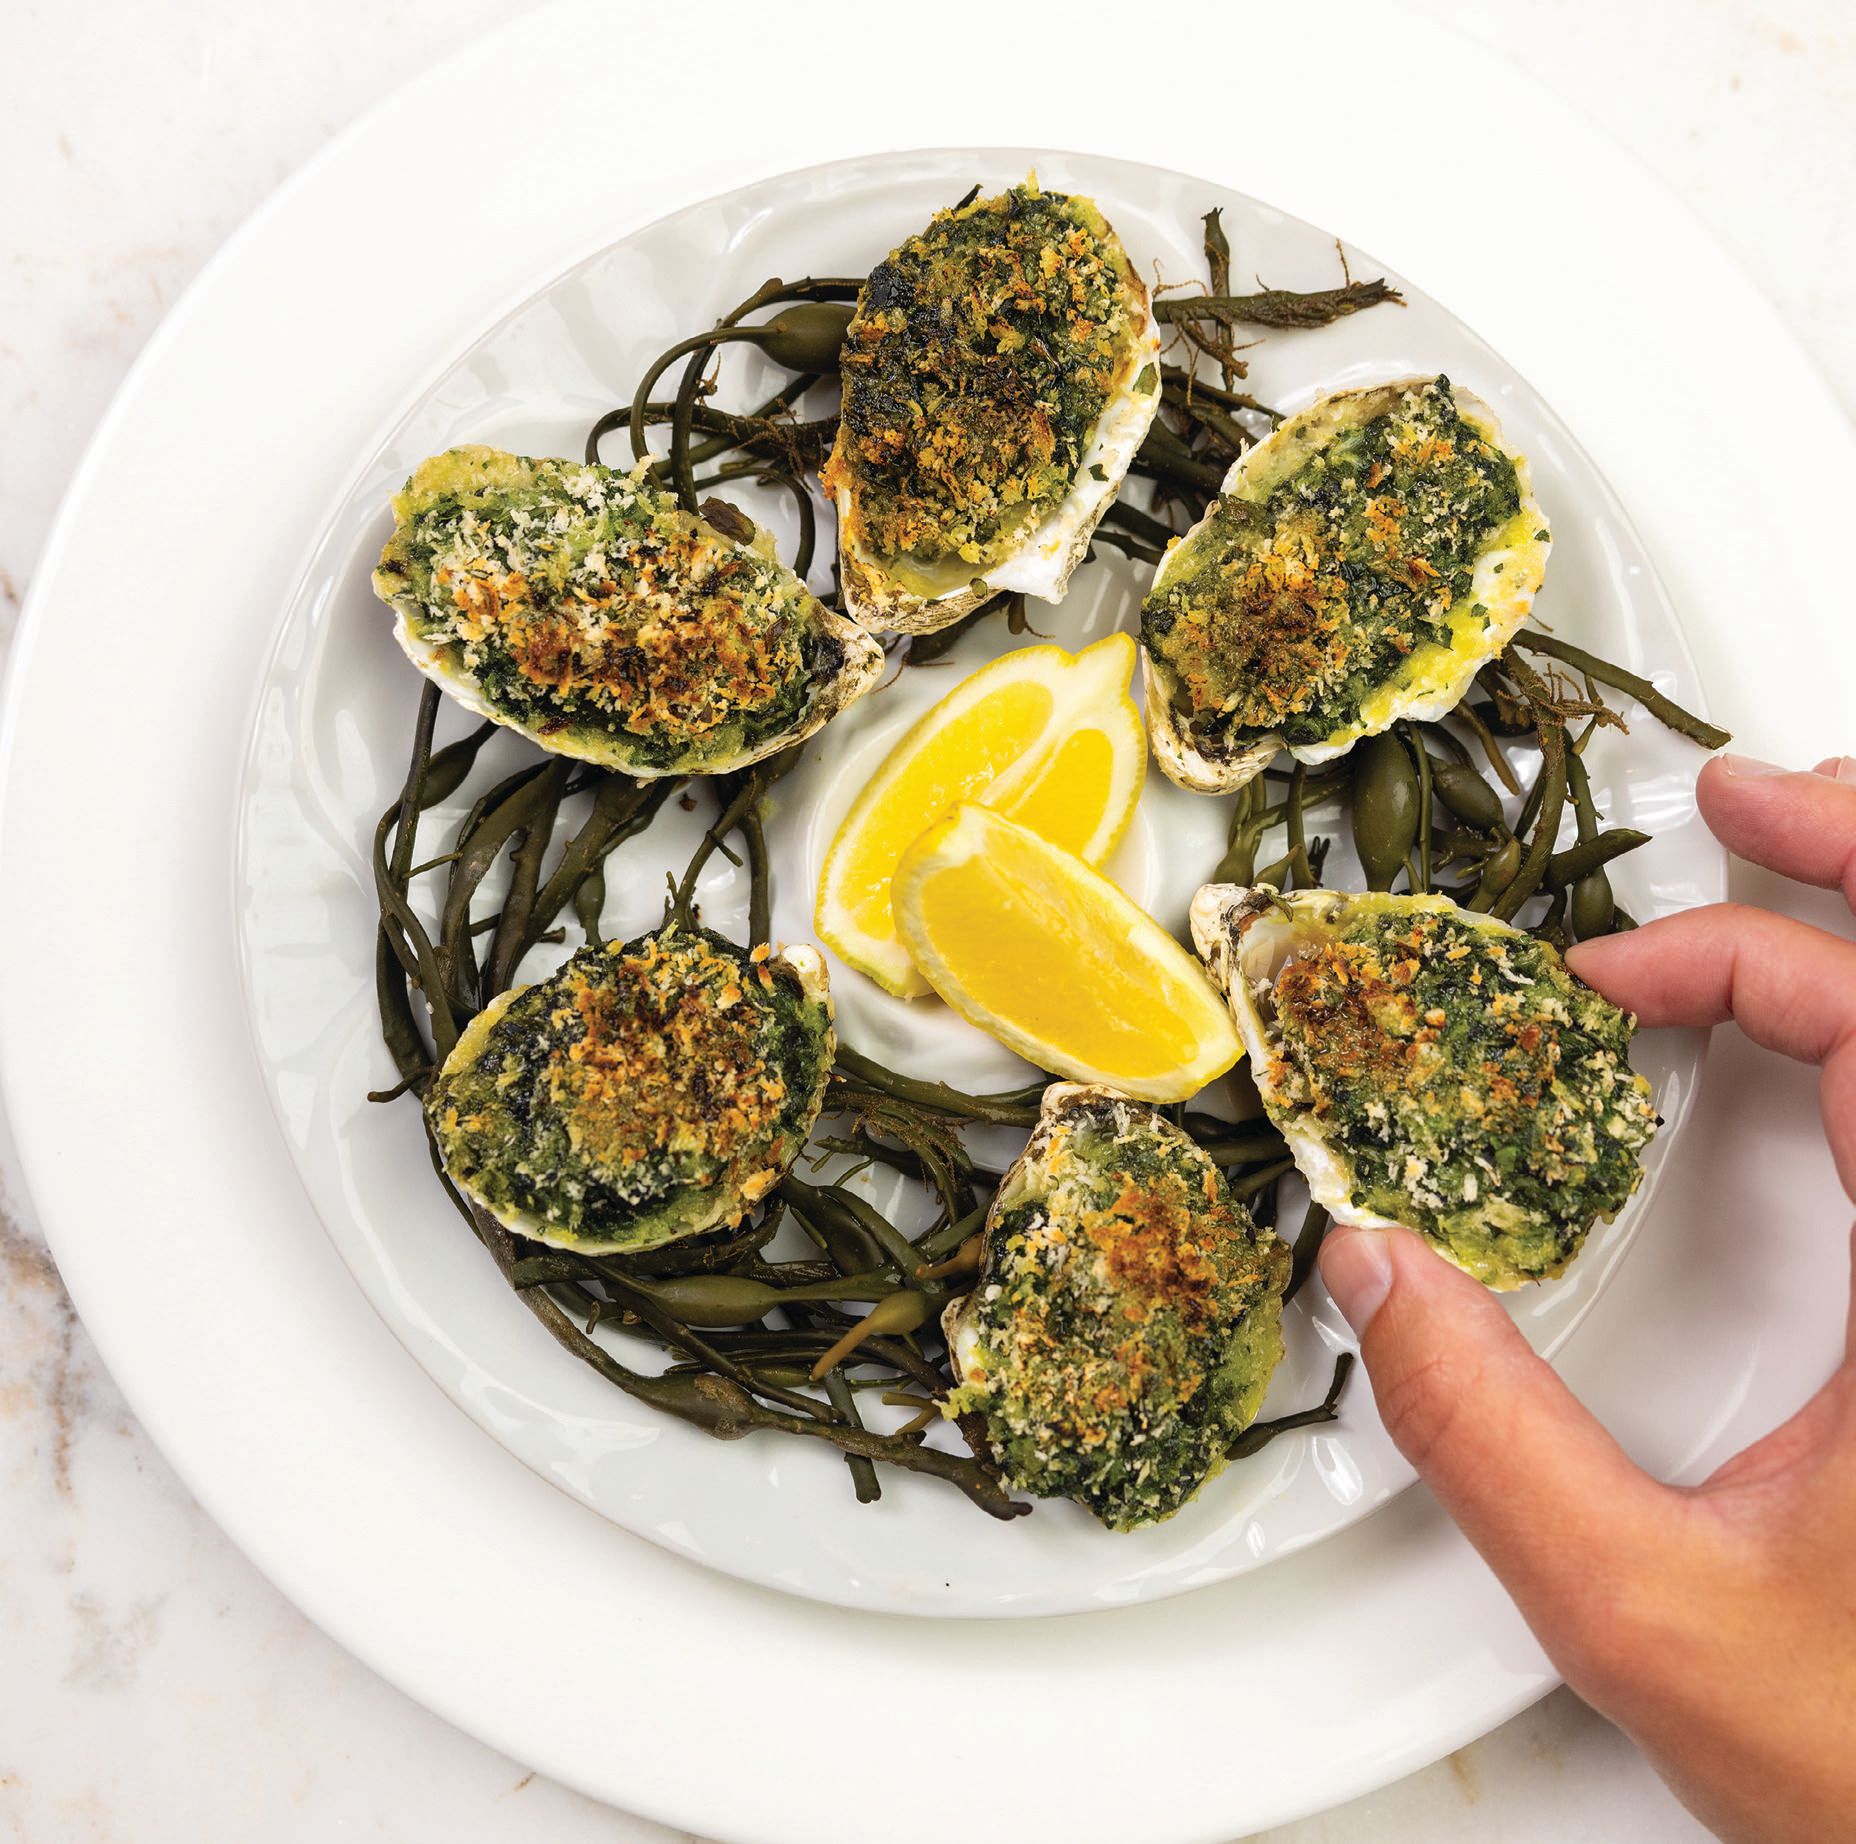 The indulgent oysters Rockefeller includes Pernod cream, spinach, watercress and parsley breadcrumb topping. PHOTO COURTESY OF CAESARS ENTERTAINMENT